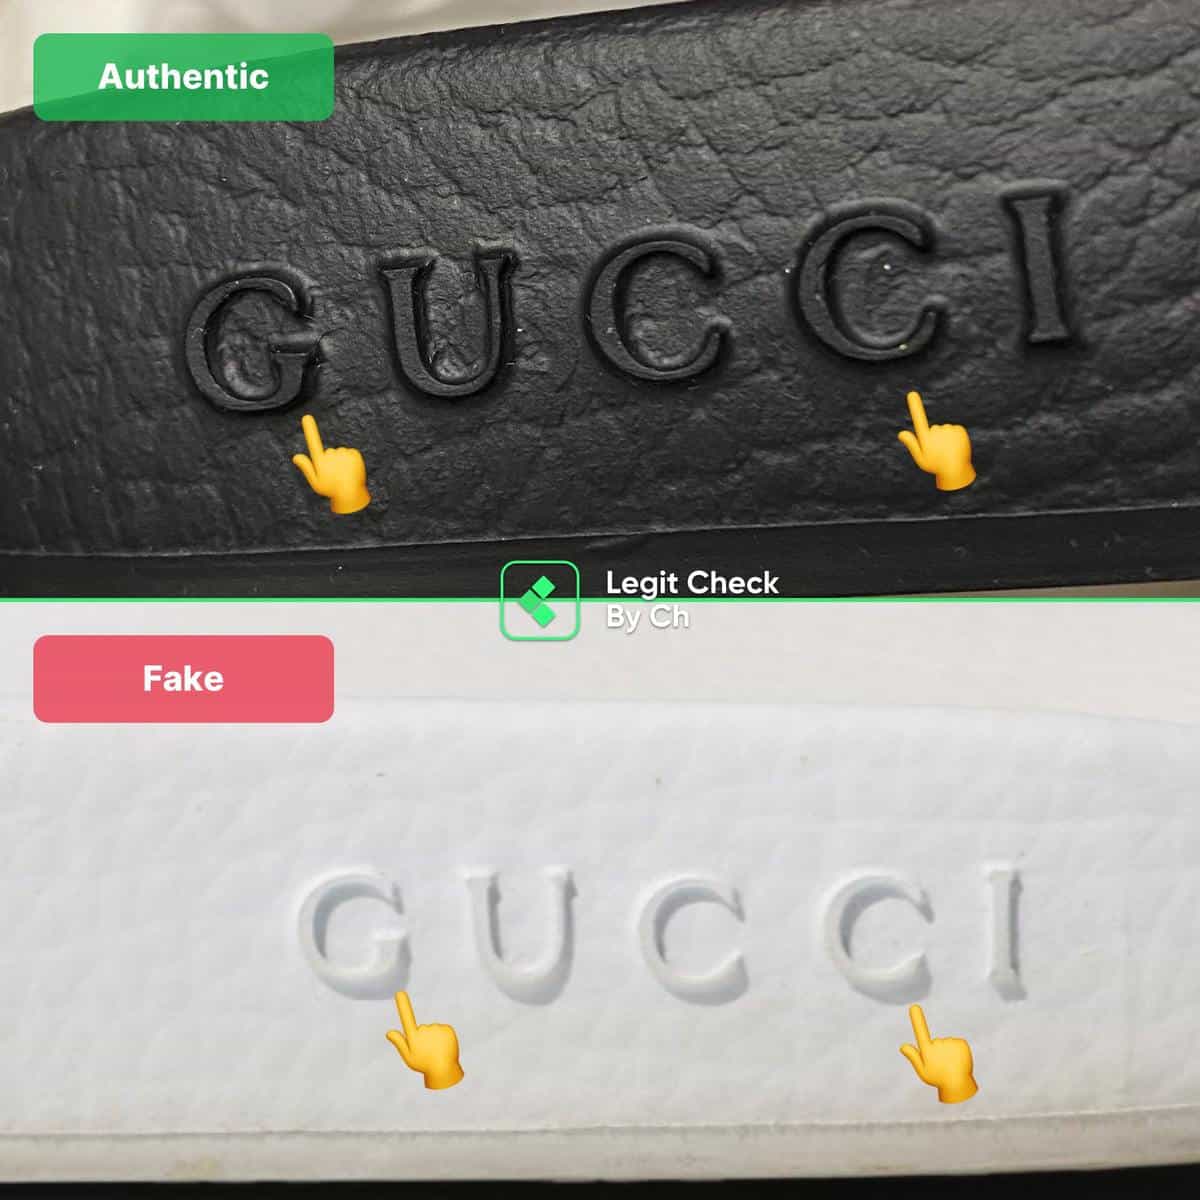 How To Spot Fake - Legit Check By Ch